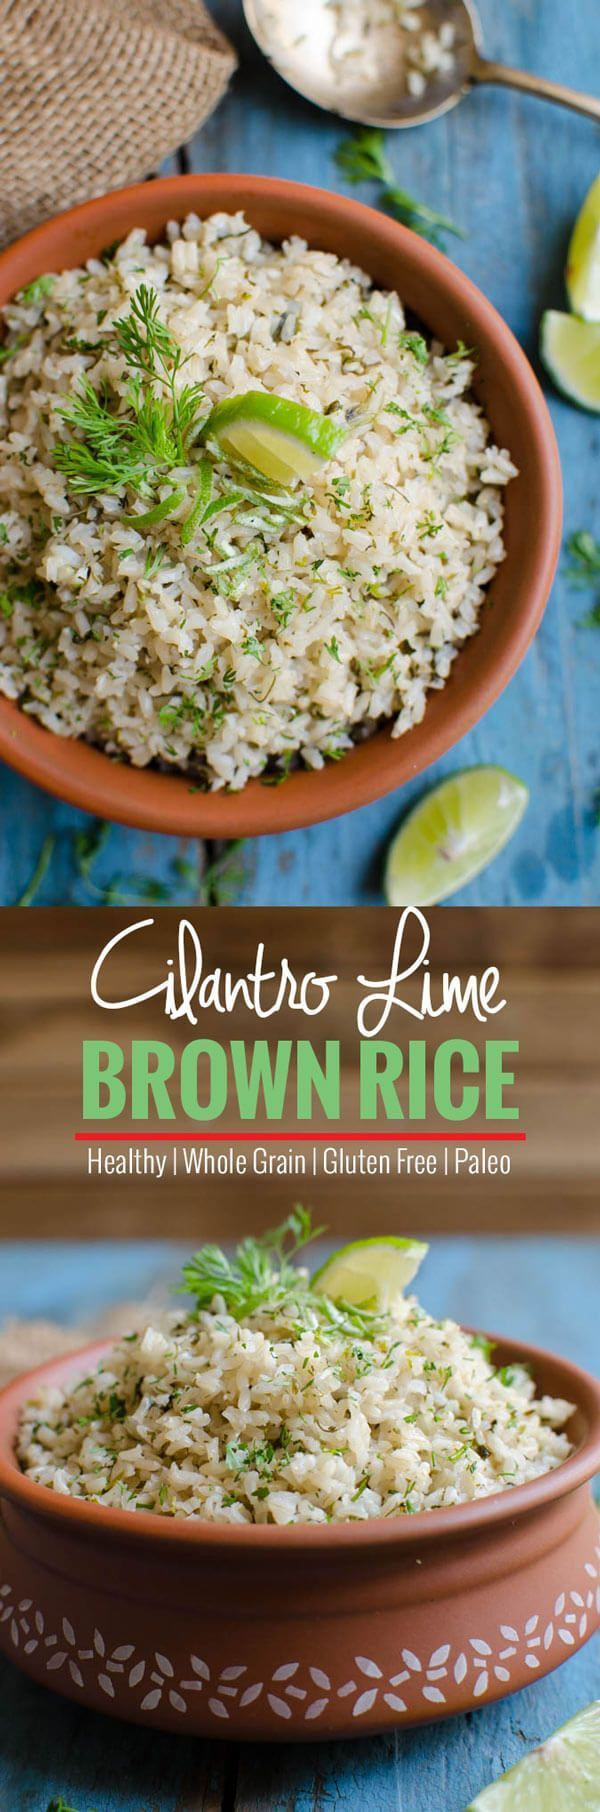 Healthy Rice Side Dishes
 Cilantro Lime Brown Rice Recipe